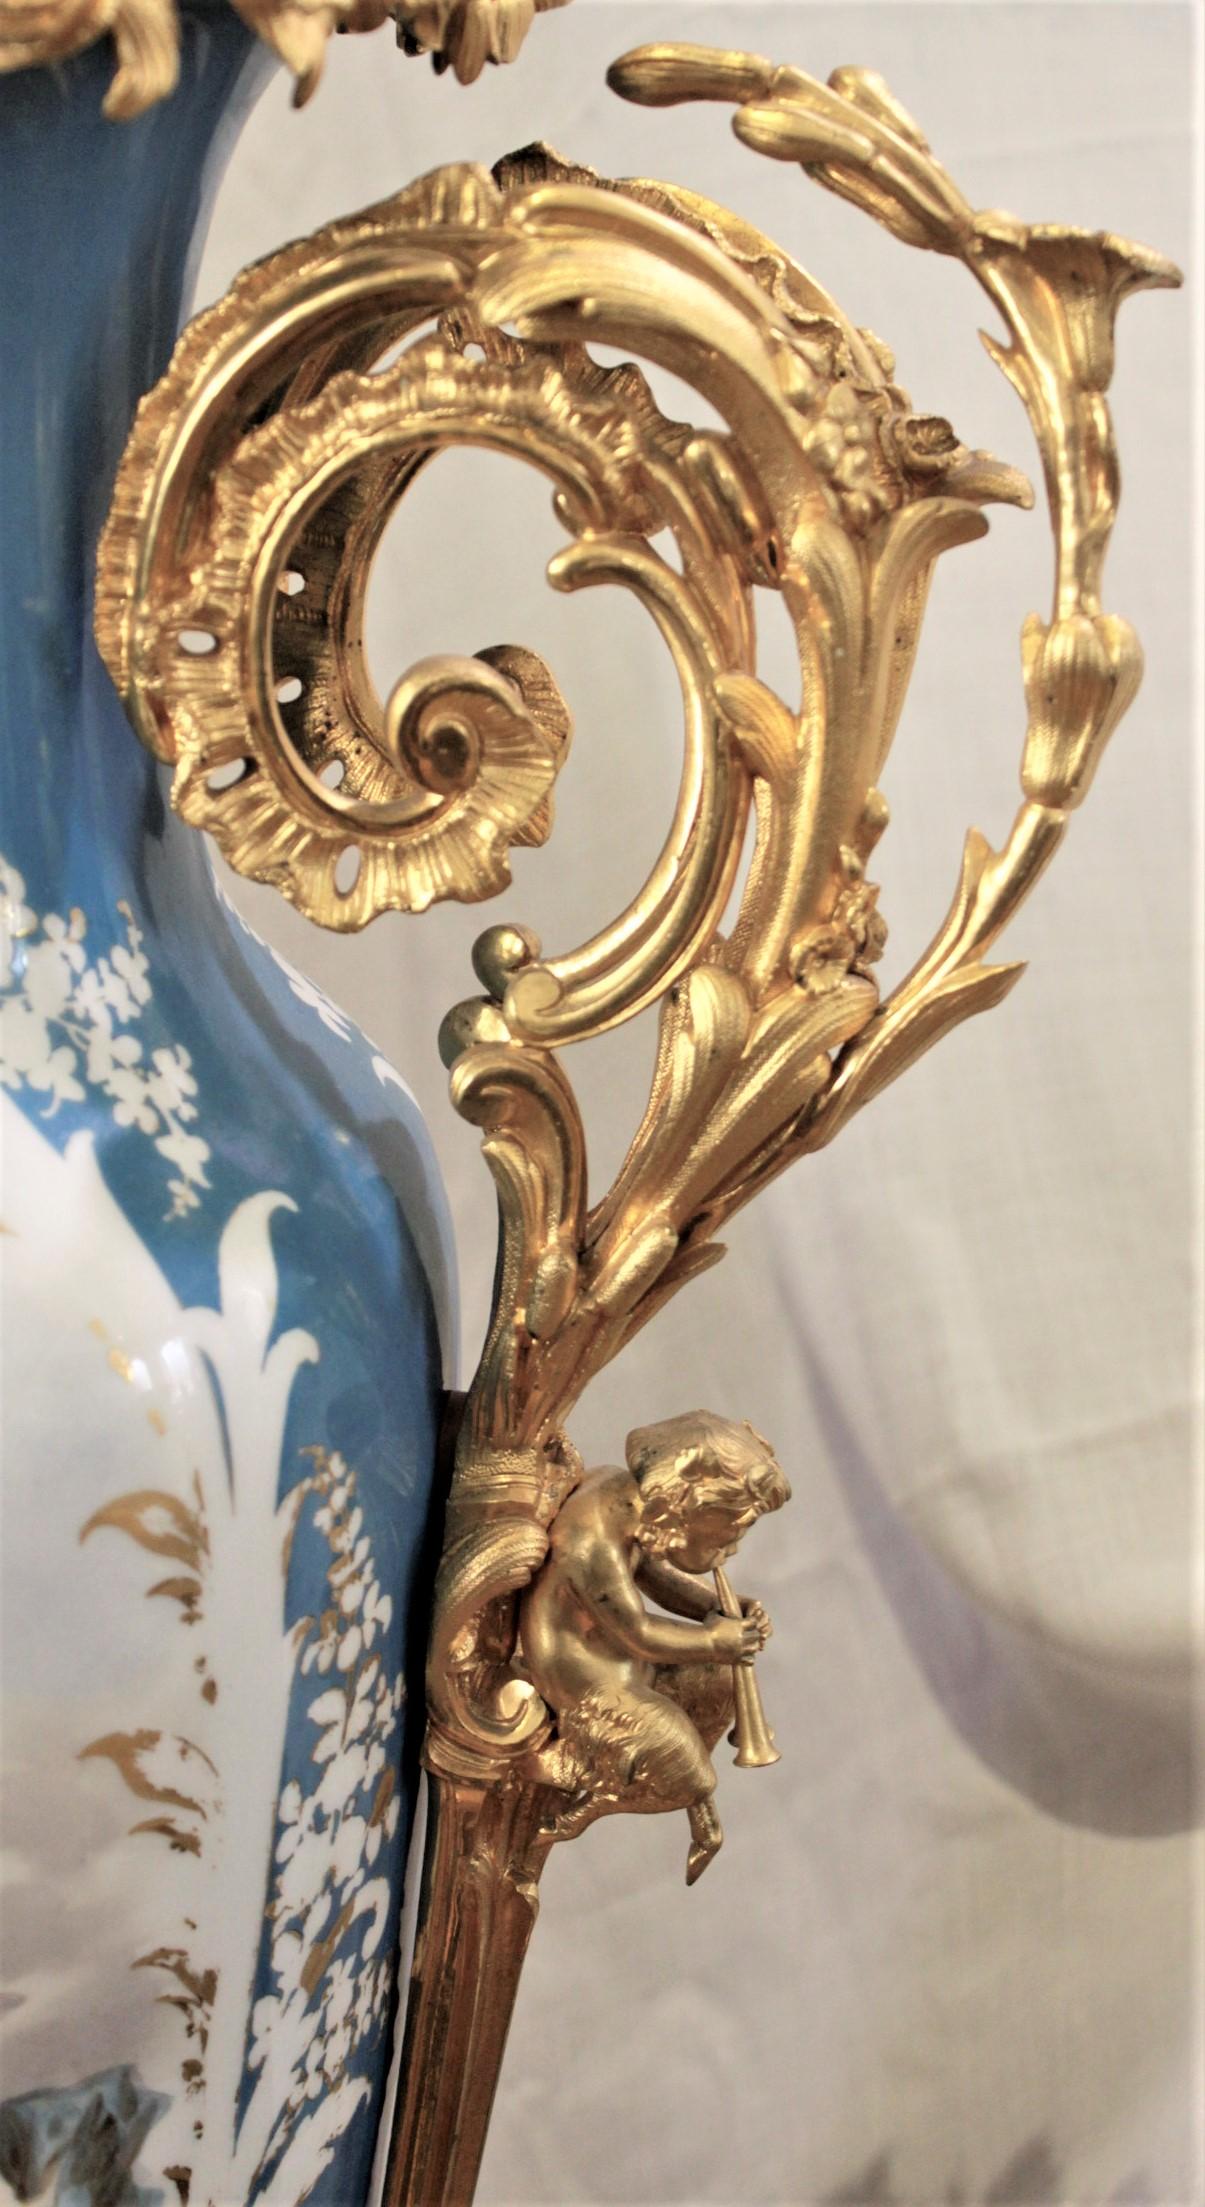 Large Antique Sevres Styled Hand-Painted Porcelain Vase with Gilt Bronze Mounts For Sale 4